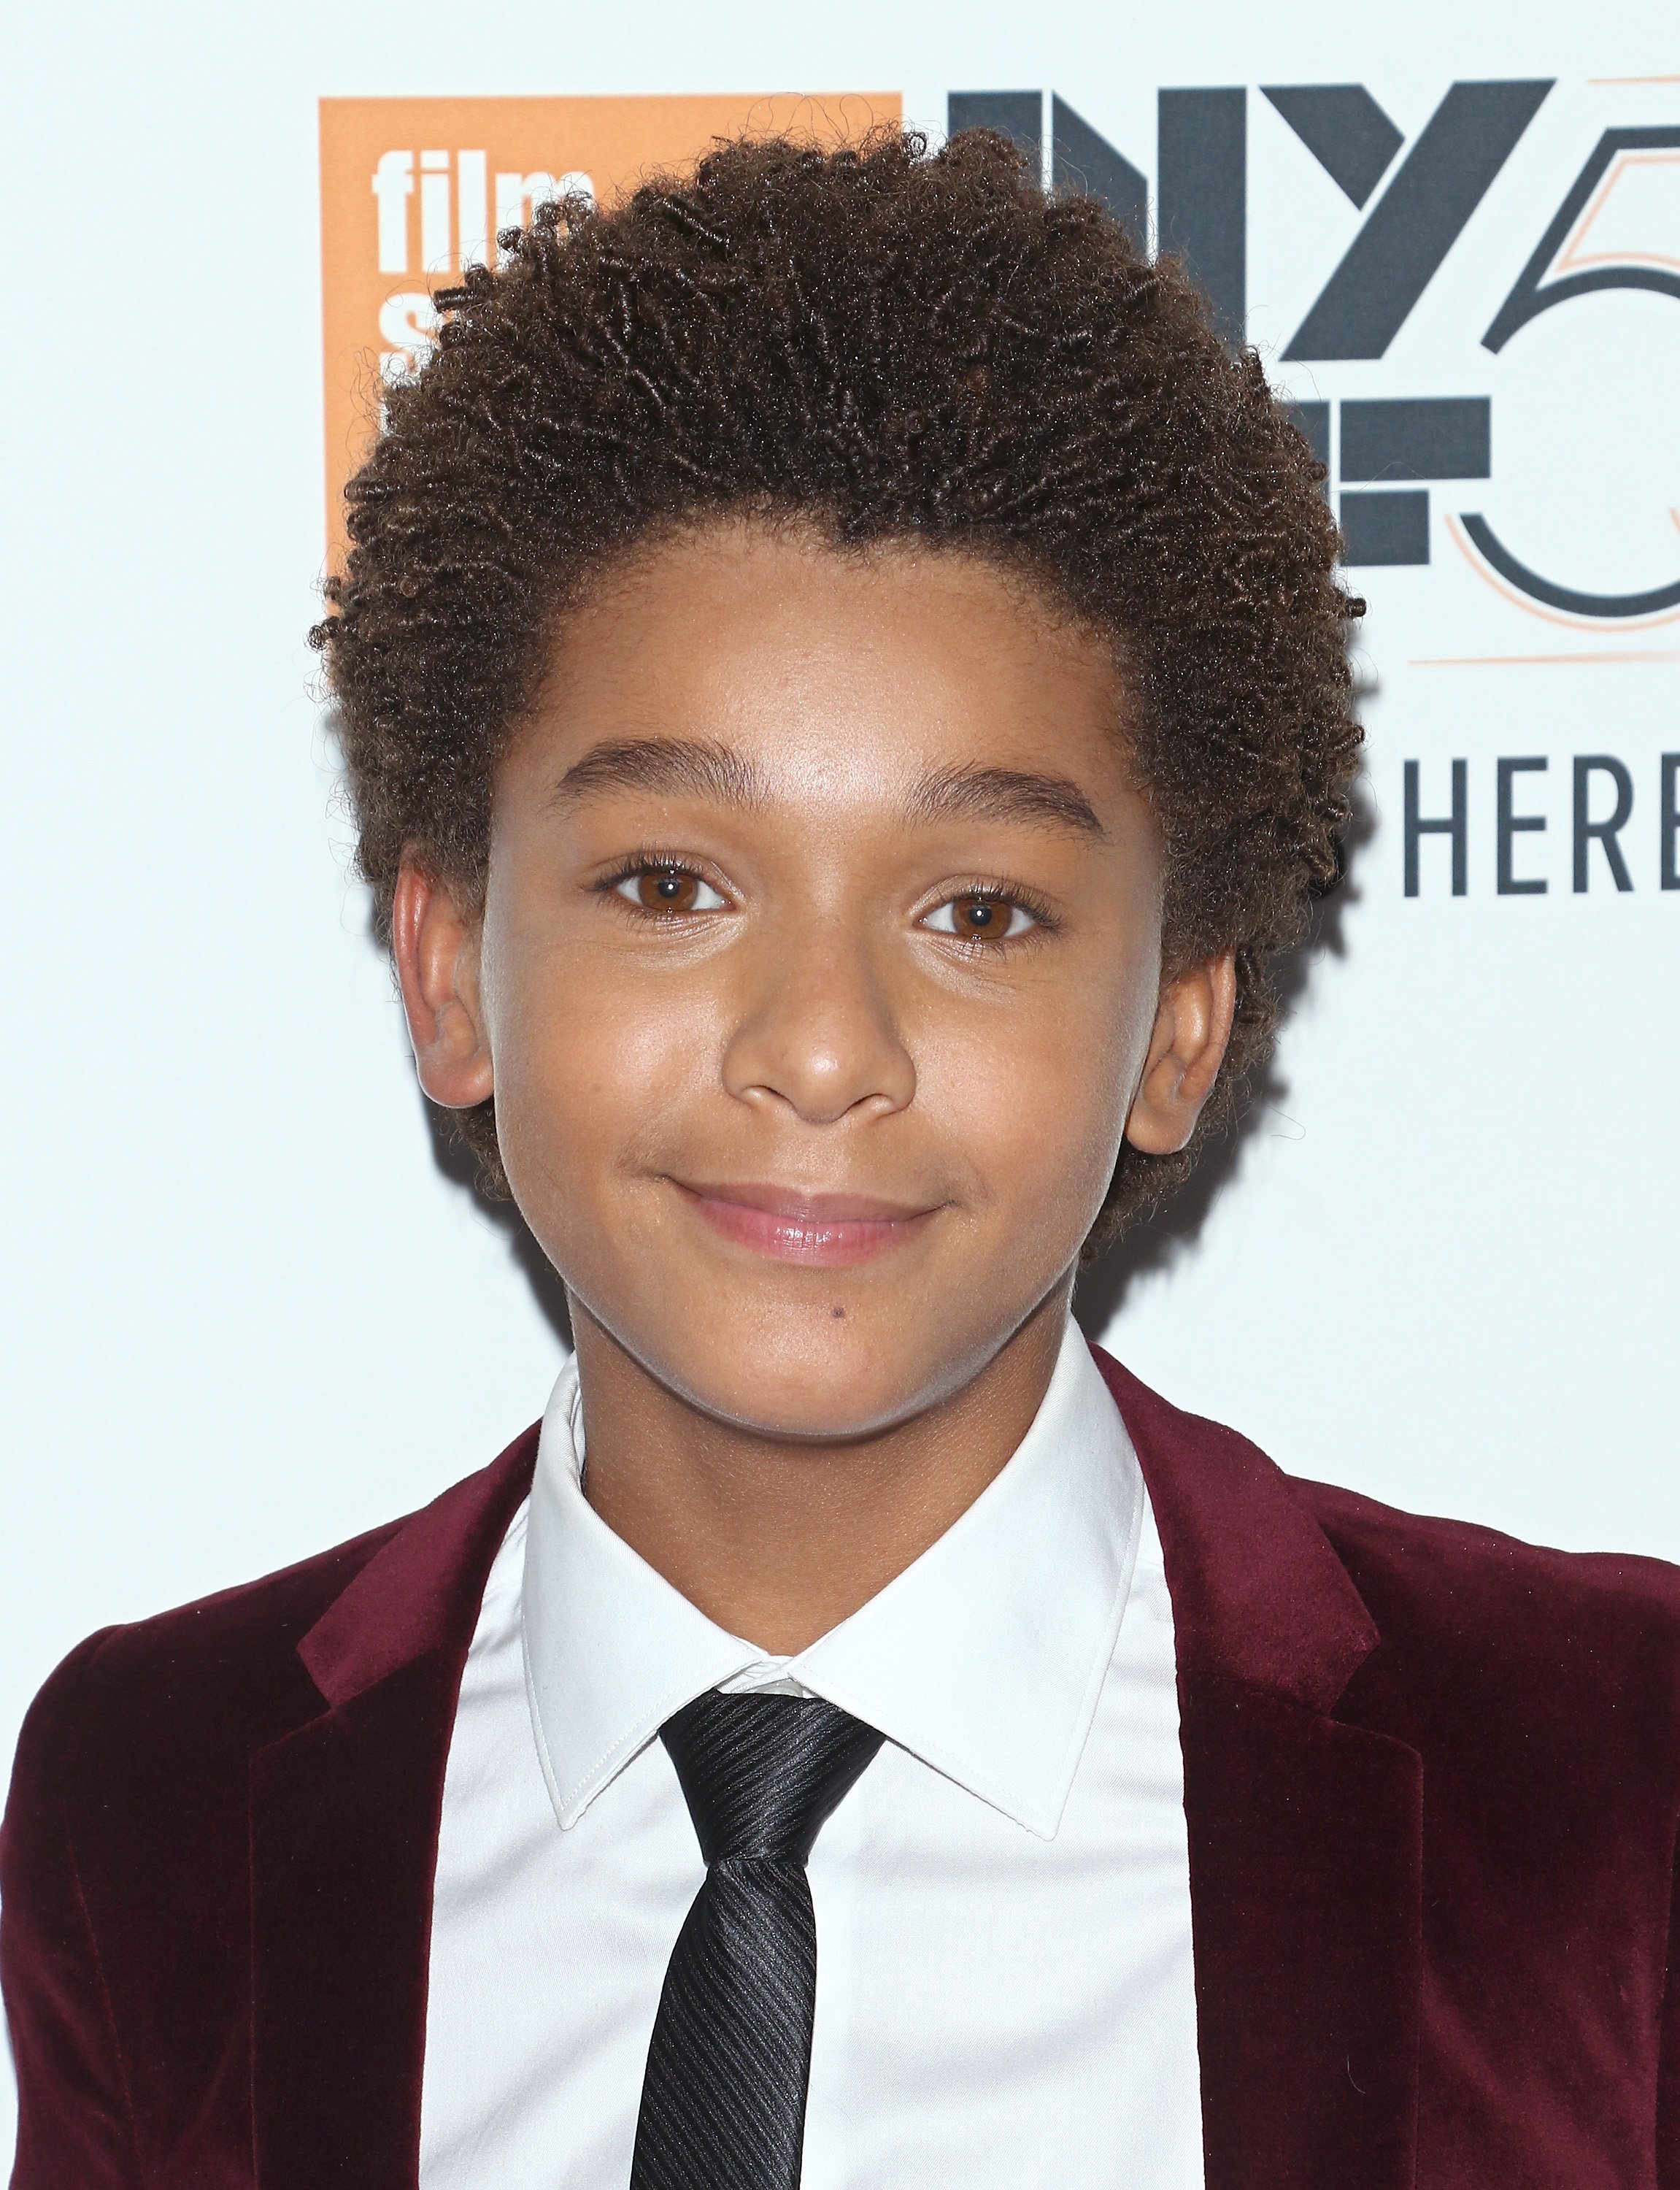 Jaden Michael attends the 55th New York Film Festival "Wonderstruck" premiere at Alice Tully Hall on October 7, 2017 in New York City. | Source: Getty Images